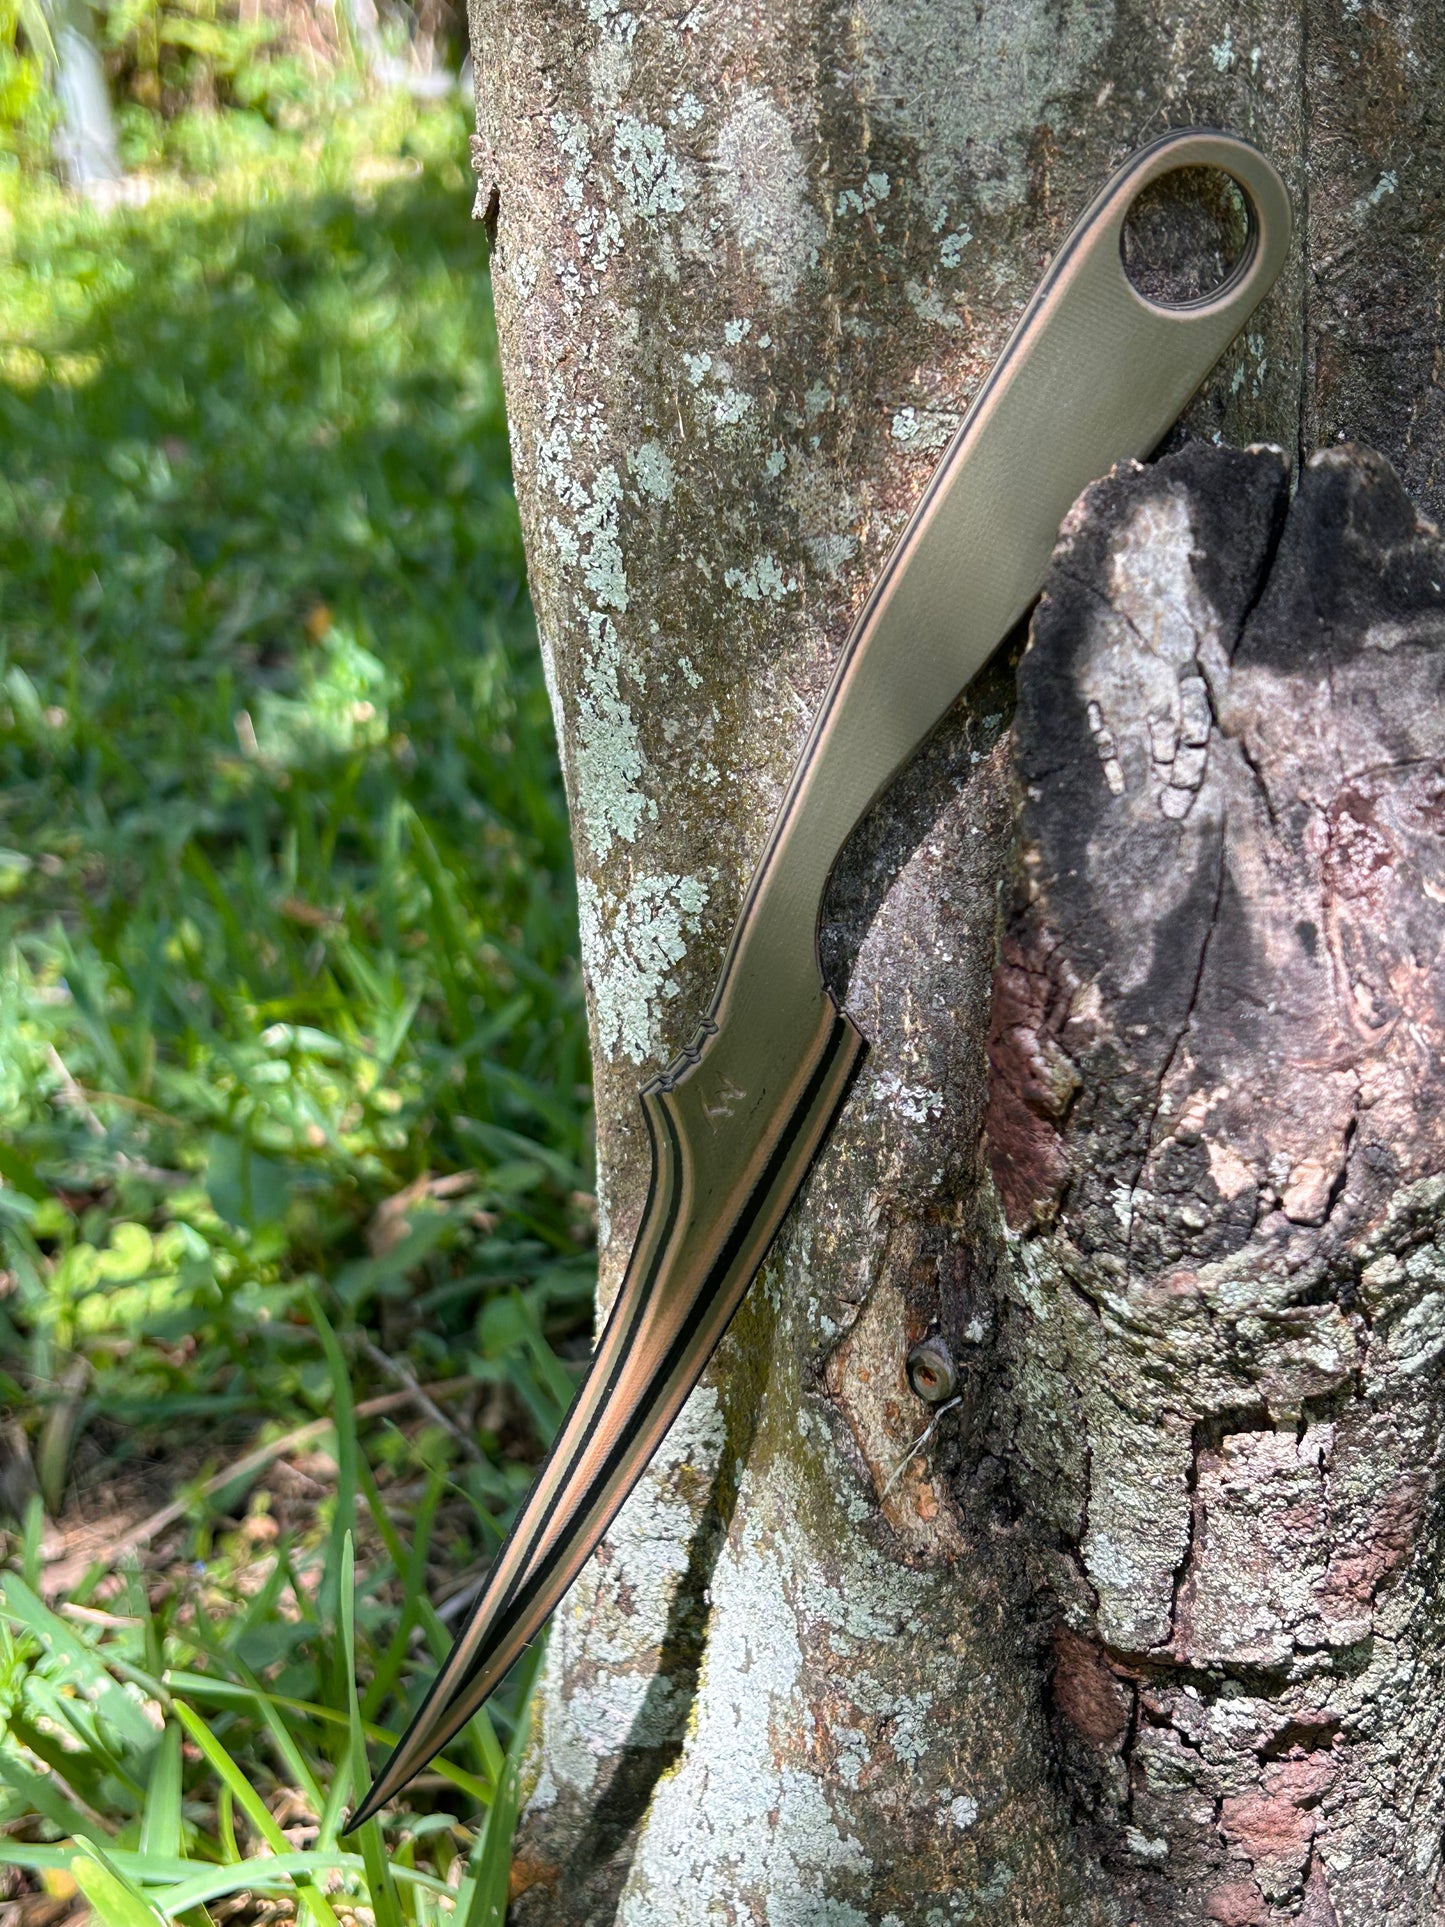 Non-Metallic Conceal Carry Knife - Mosquito XL